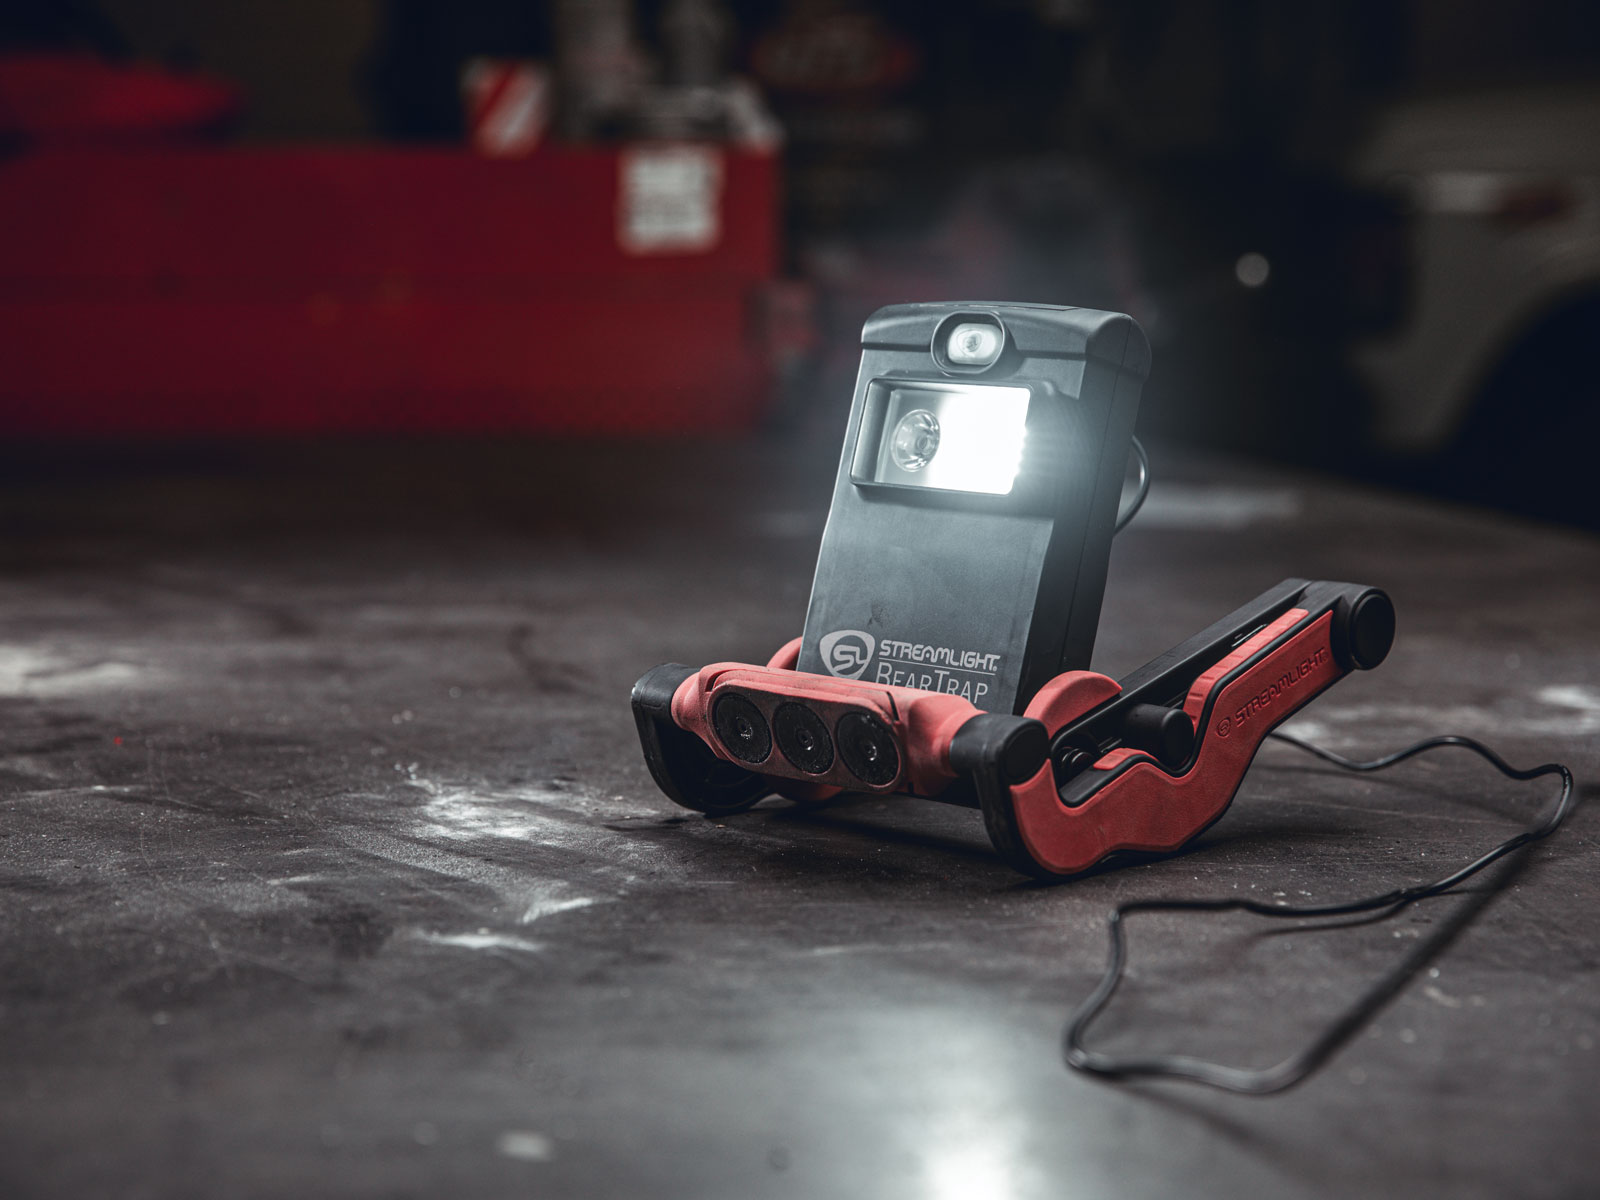 Work lights like this BearTrap rechargeable model can clamp virtually anywhere or stand on their own to light up an environment while keeping the worker’s hands free. (Photo courtesy of Streamlight)